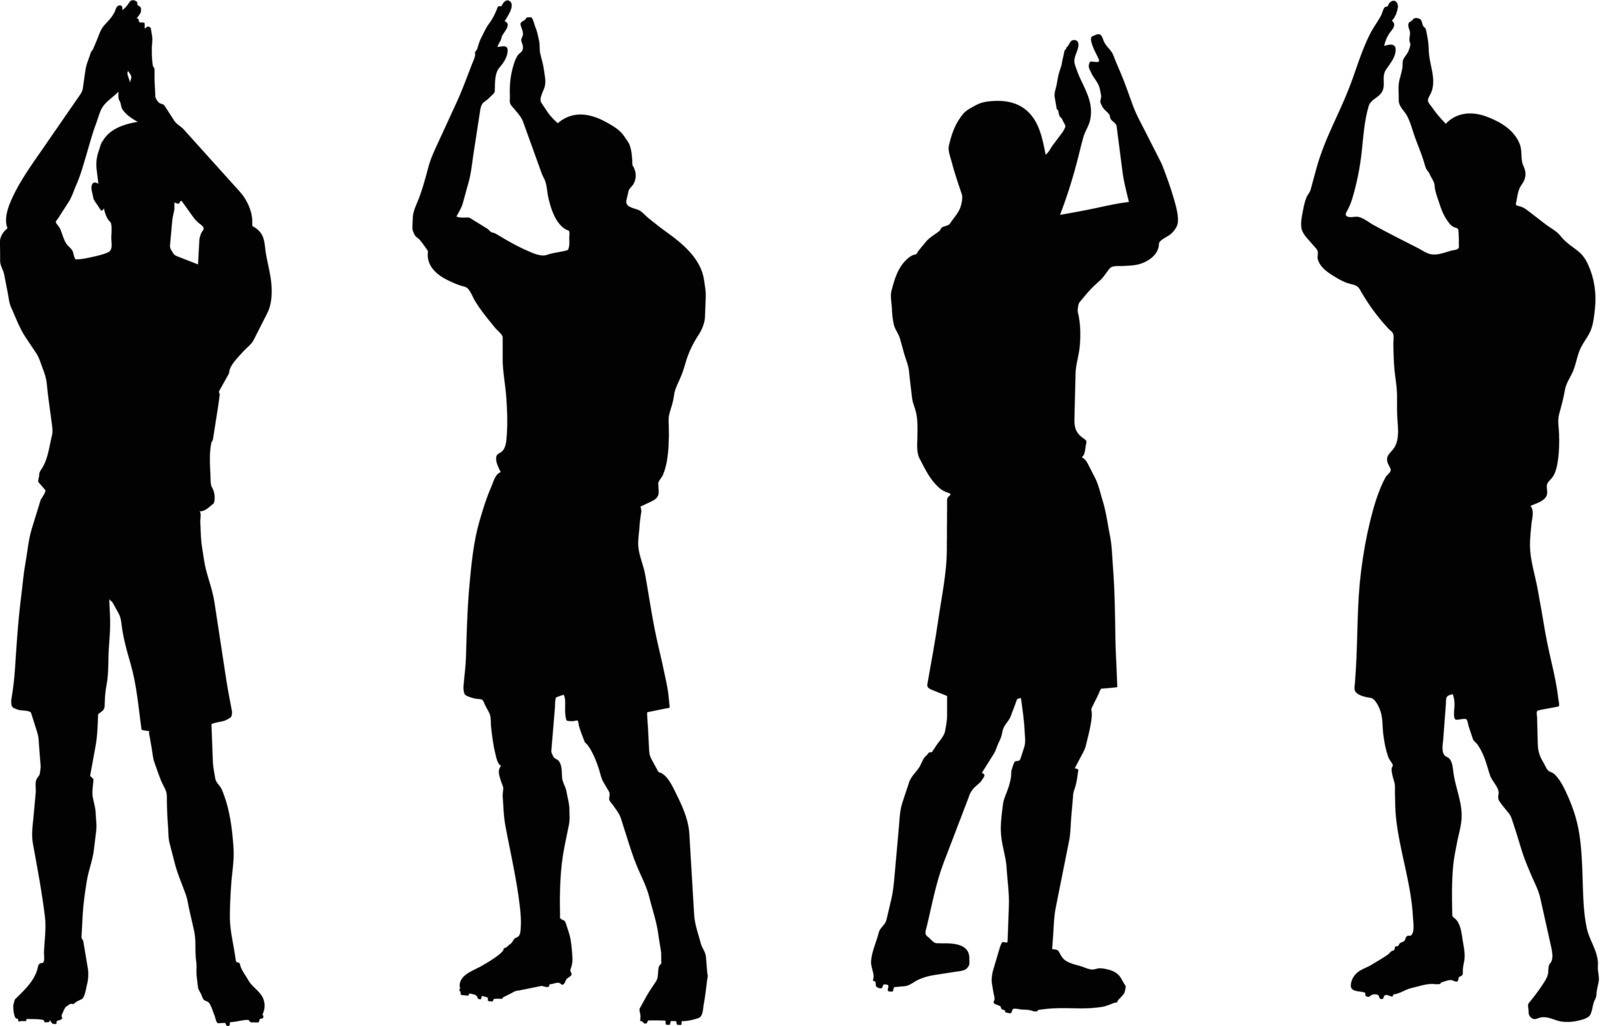 isolated poses of soccer players silhouettes in rejoices position